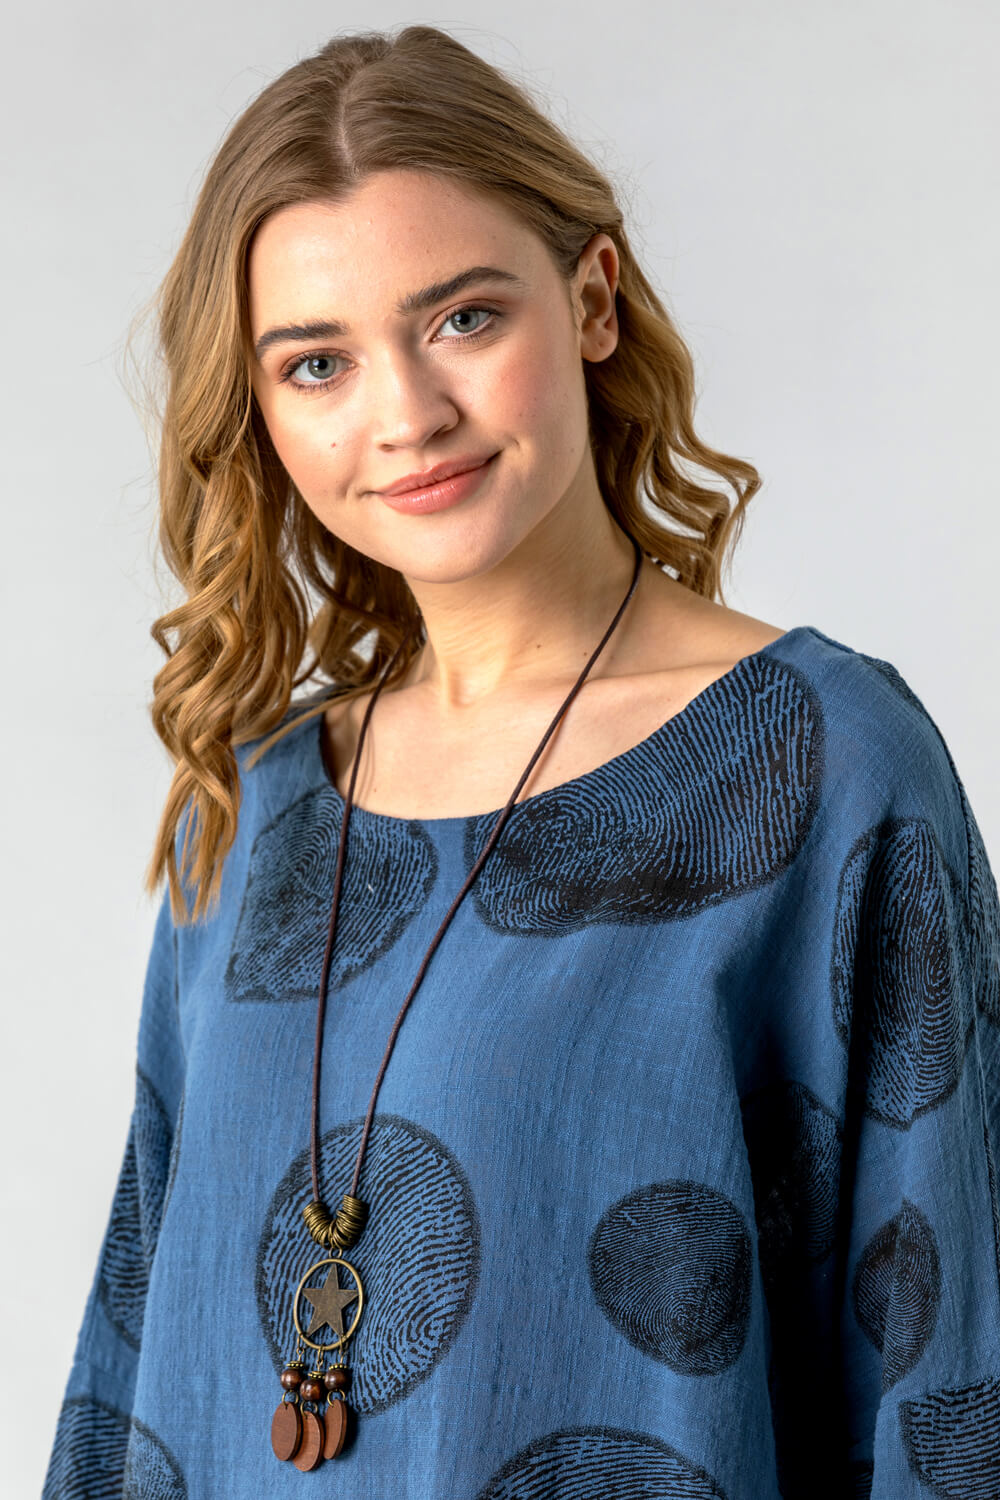 Blue Spot Print Top with Necklace, Image 3 of 4